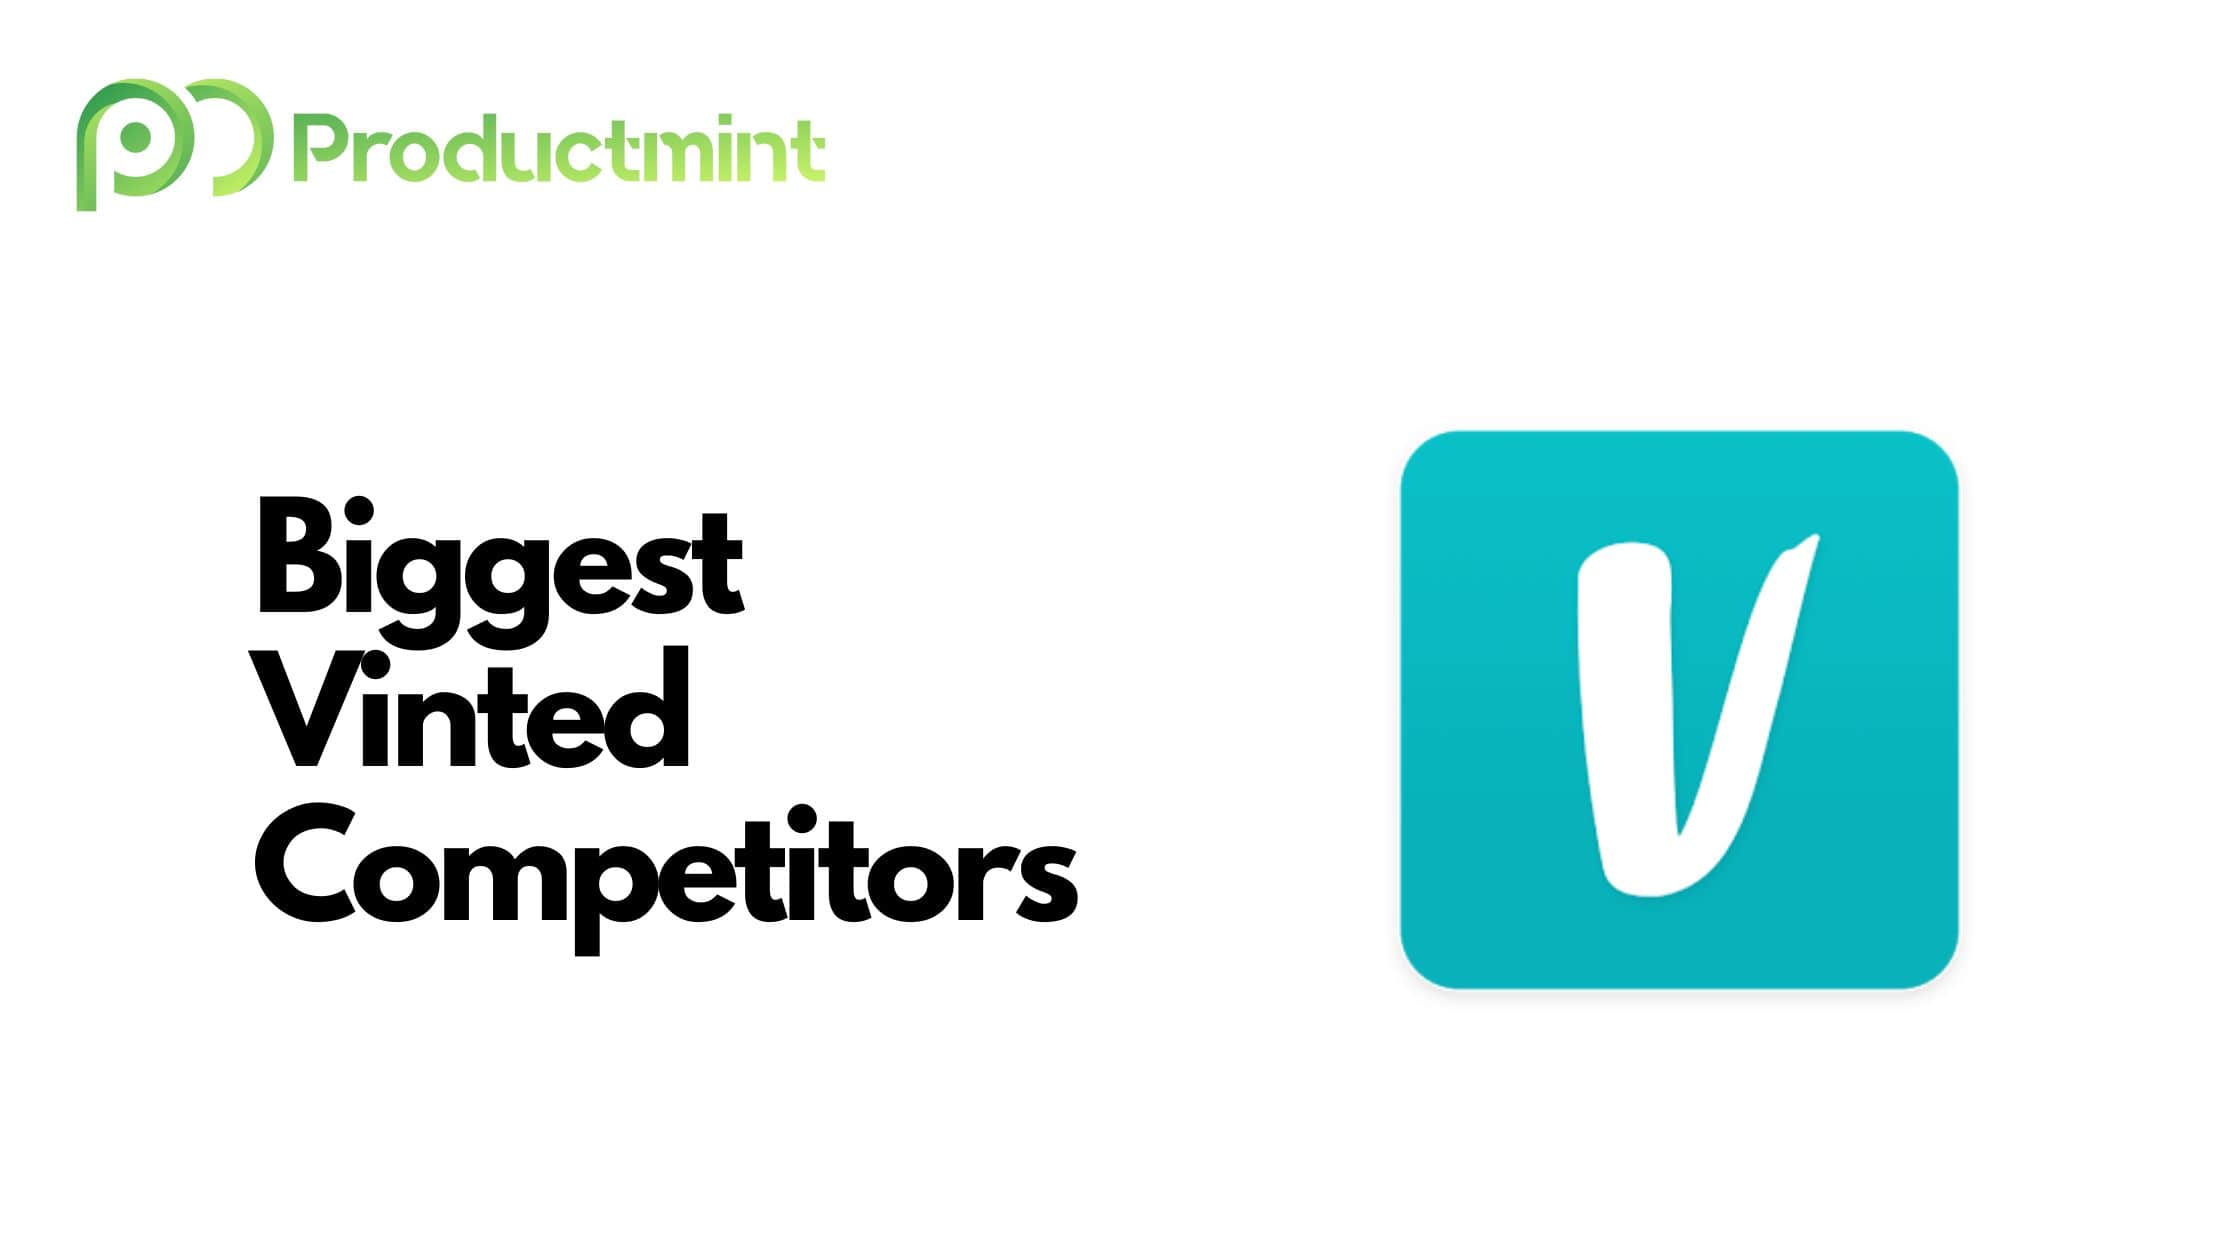 Vinted Competitors